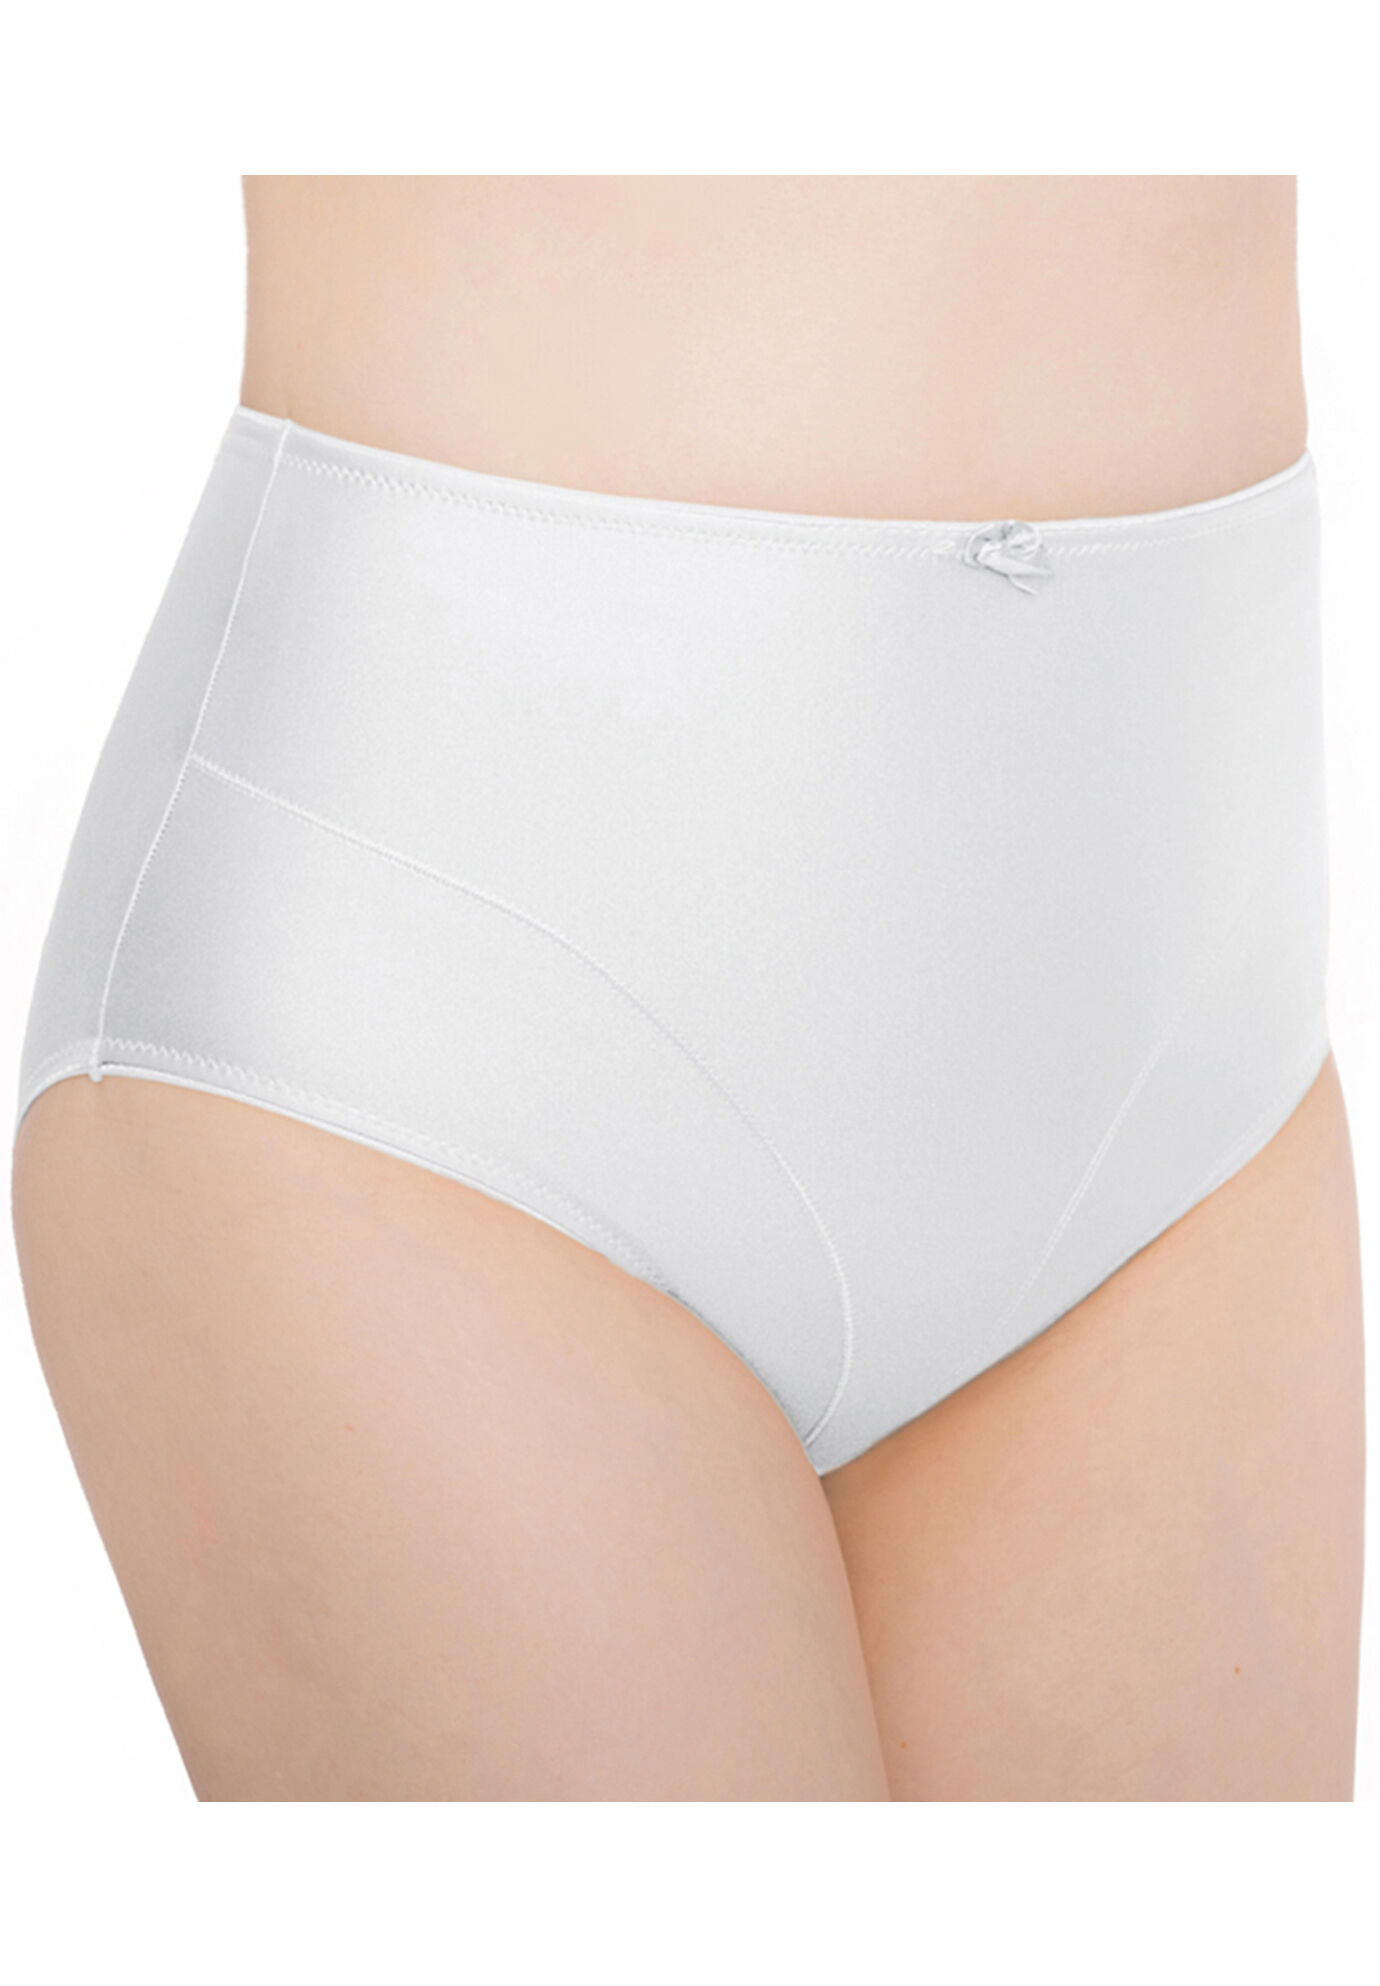 Plus Size Women's Control Top Shaping Panties by Exquisite Form in White (Size 3XL)